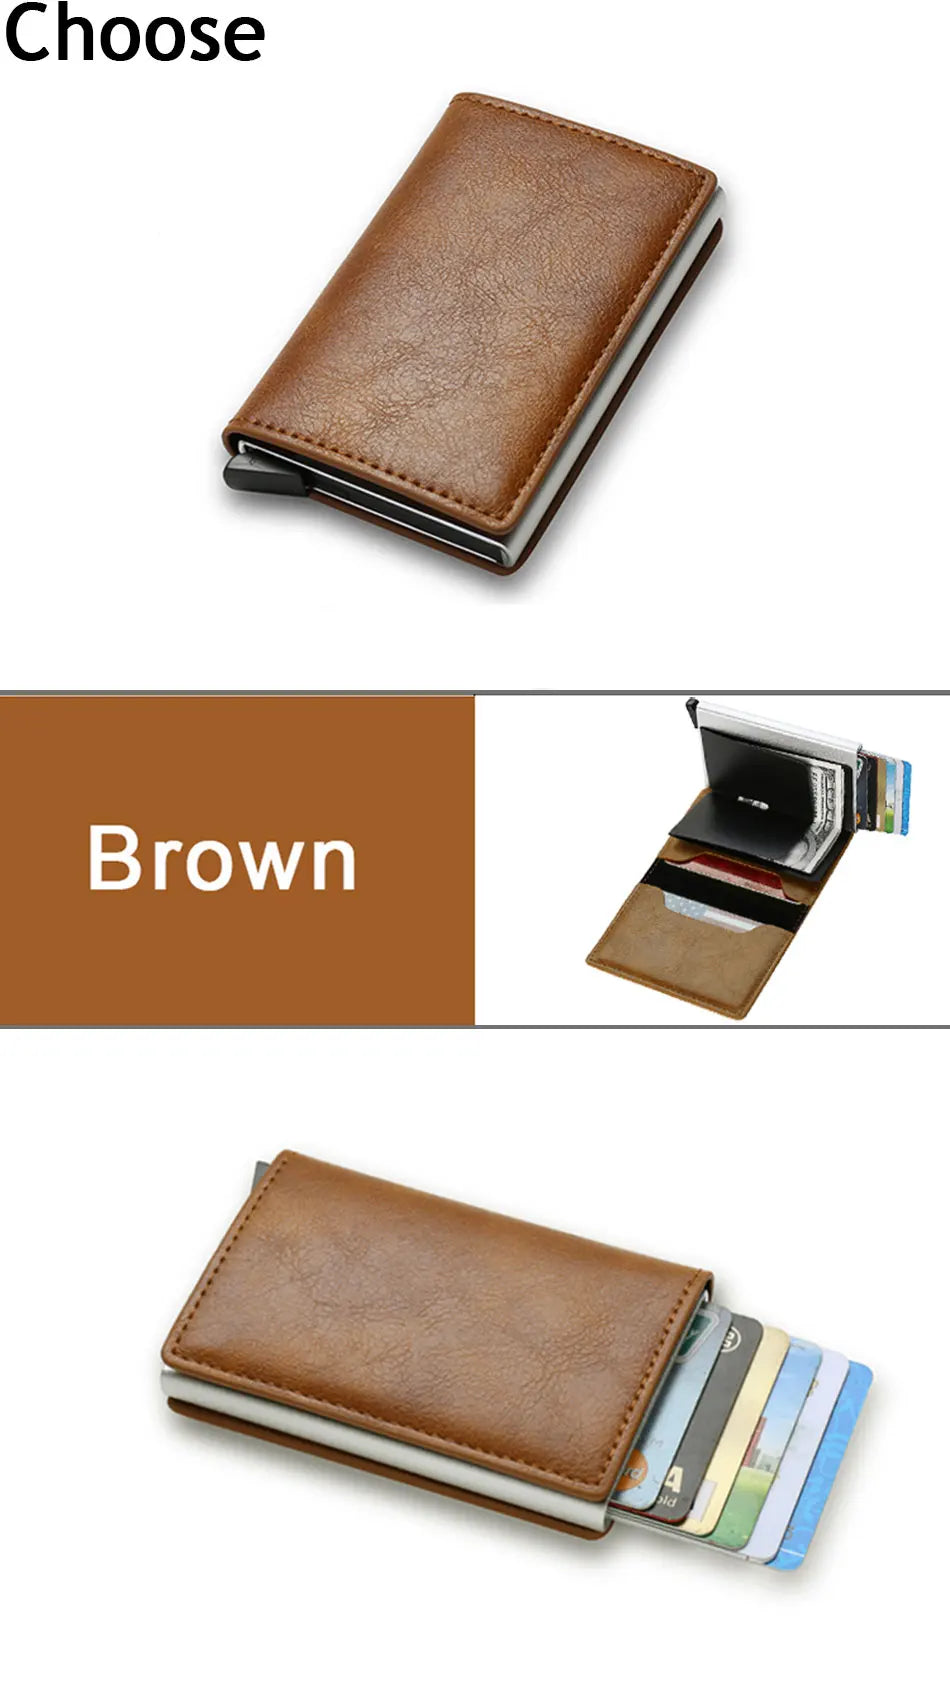 RFID Blocking Protected Magic Leather Slim Mini Small Money Wallets Case.ID Credit Bank Card Holder Wallet Luxury Brand